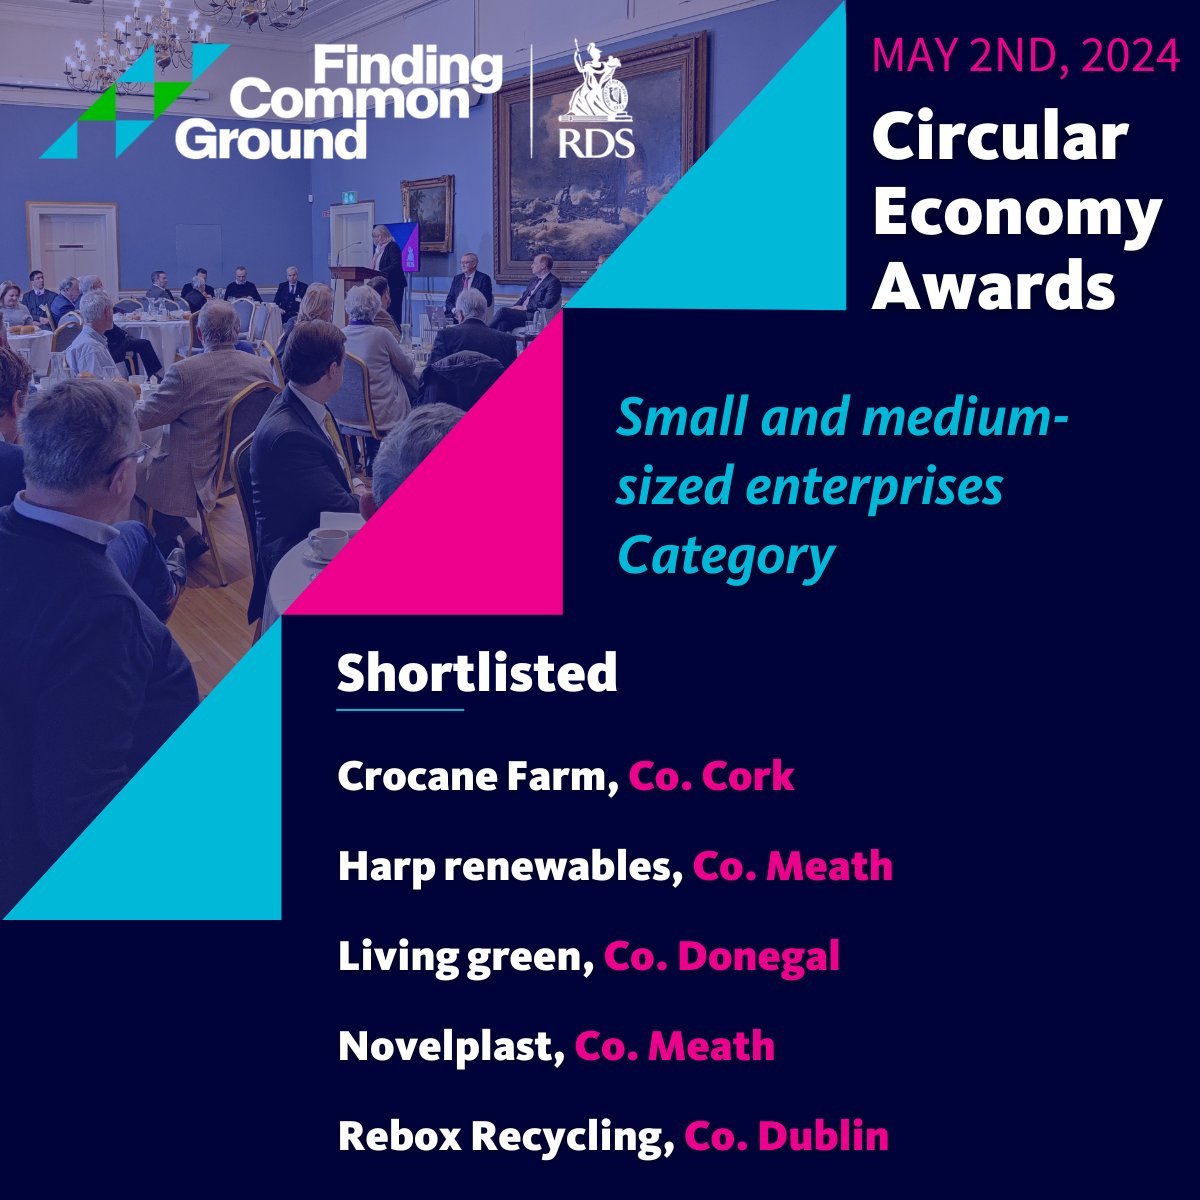 2024 marks a start of highlighting circular models and inspiring a new generation of innovation leaders, while growing awareness and support with consumers to buy products created with circular principles. For the first time, the RDS will recognise Irish businesses,